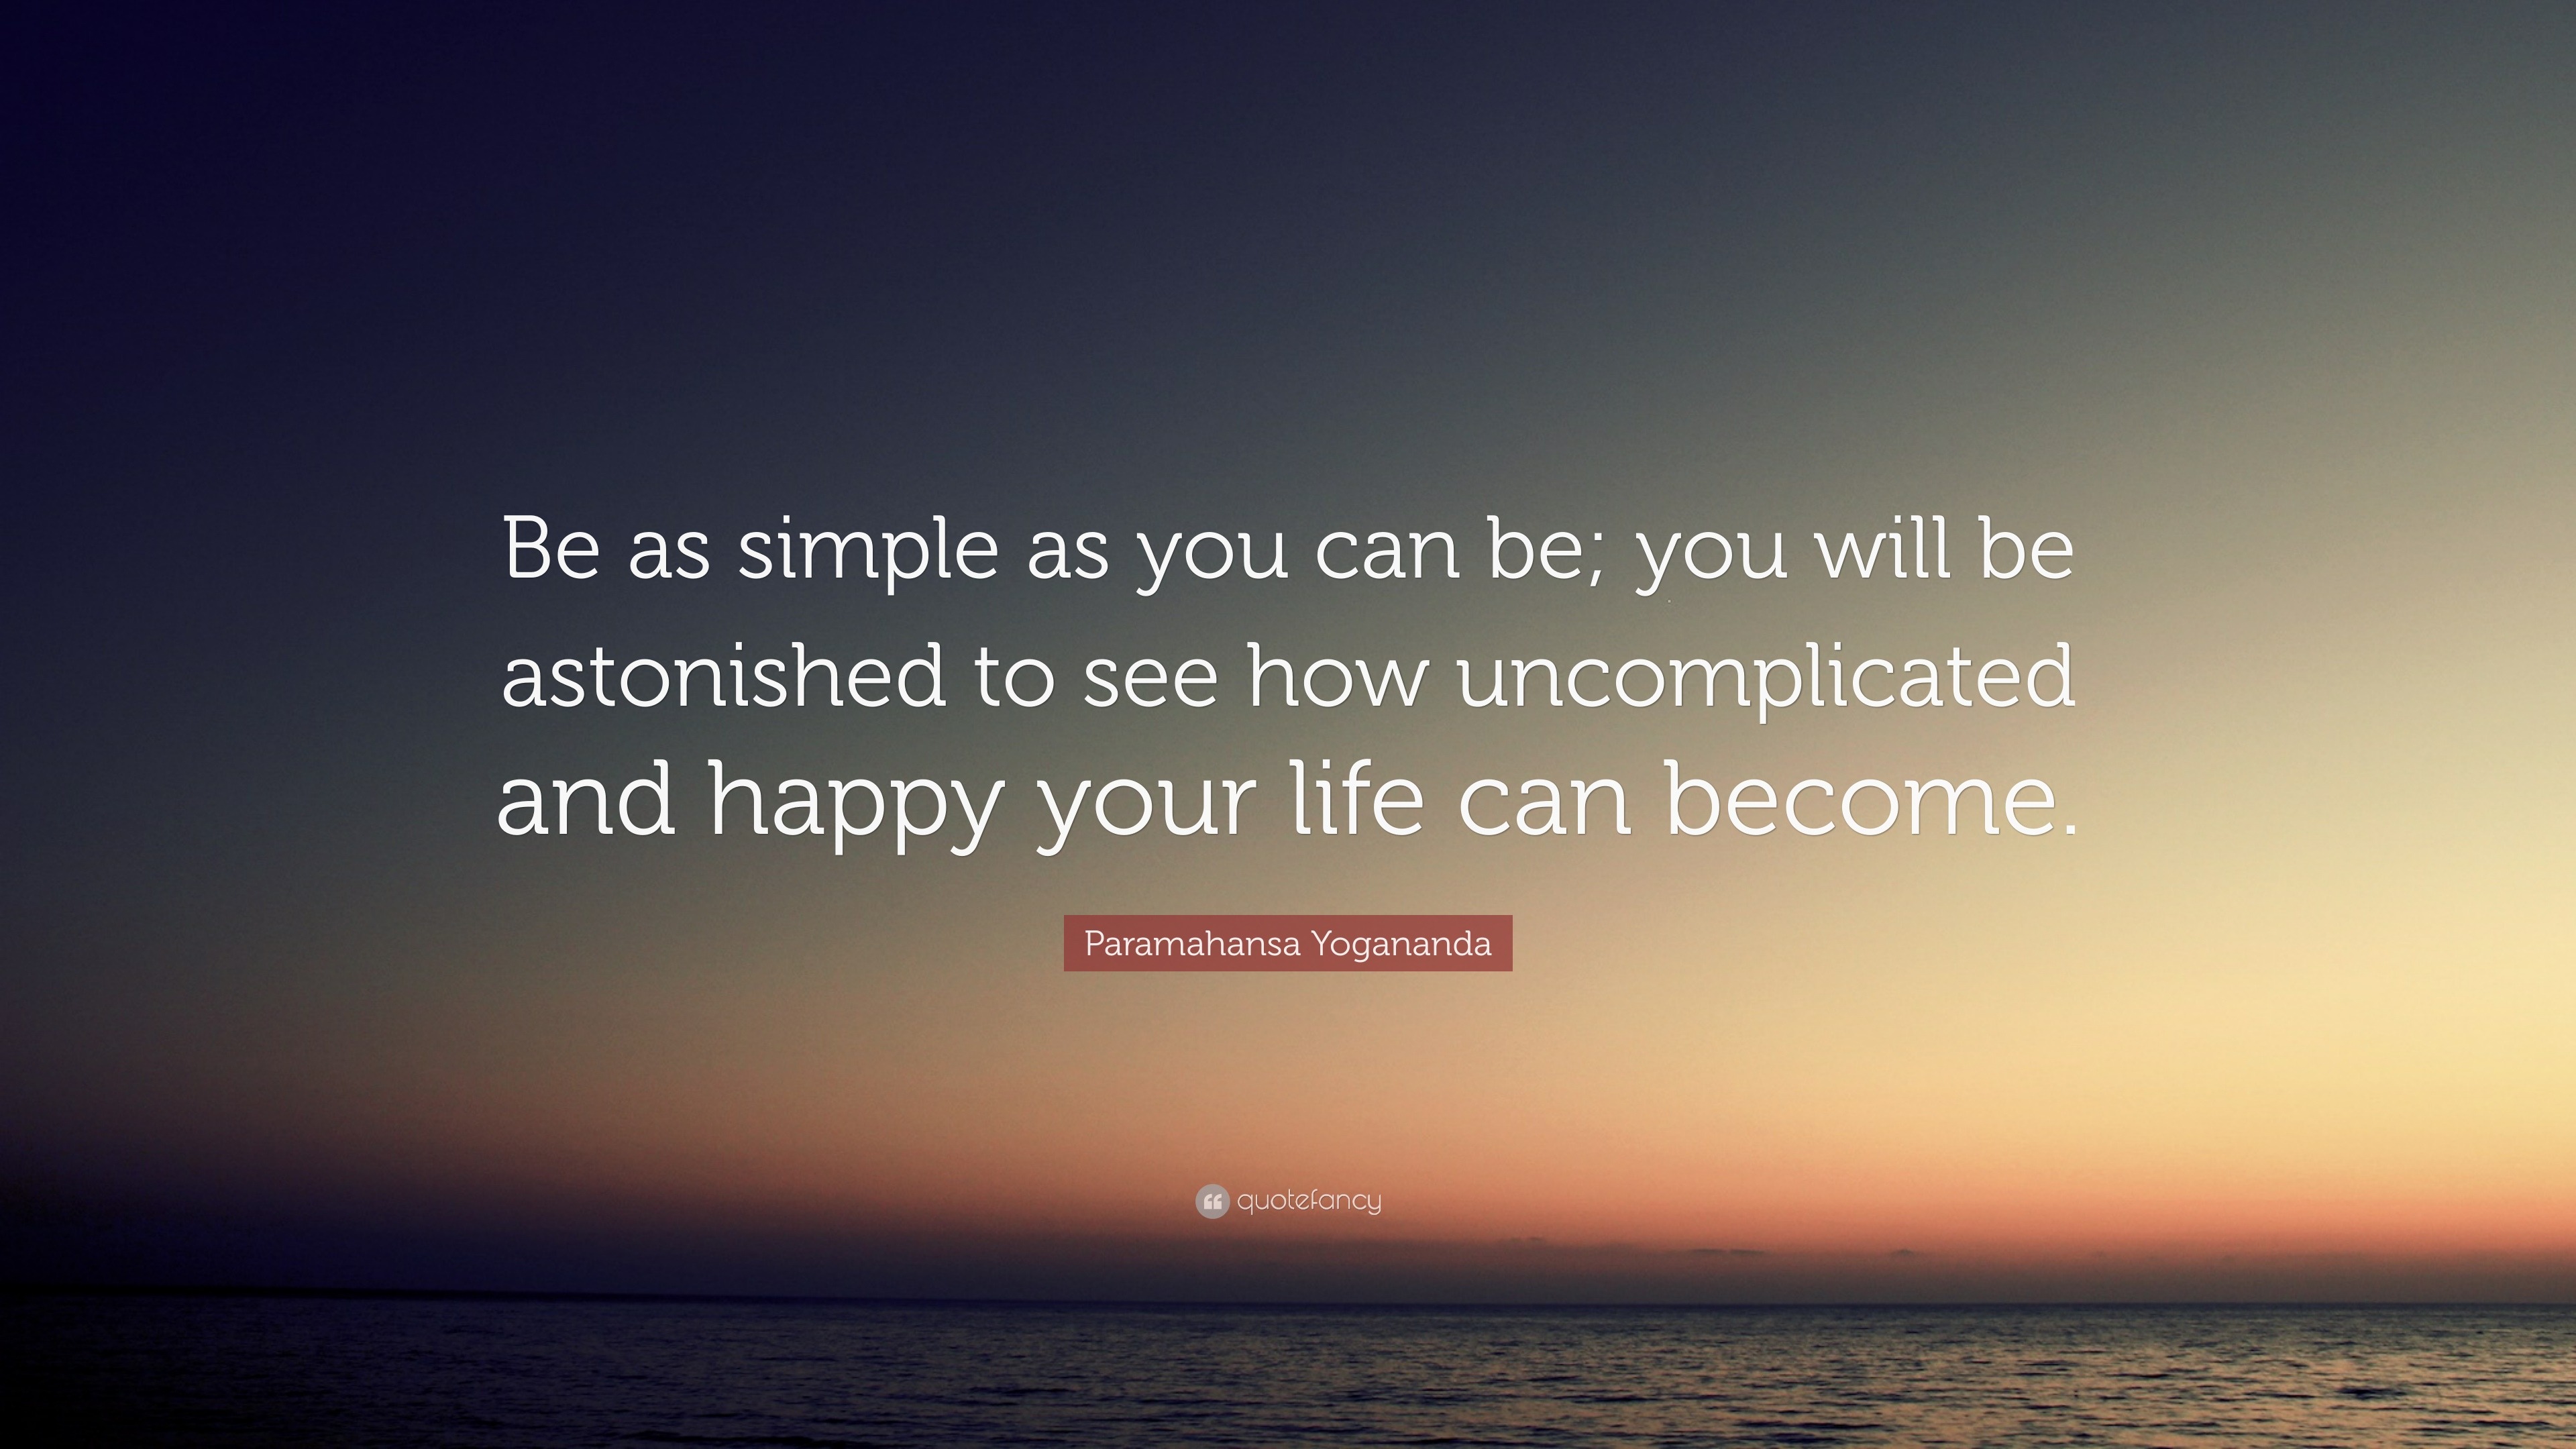 Paramahansa Yogananda Quote “Be as simple as you can be you will be